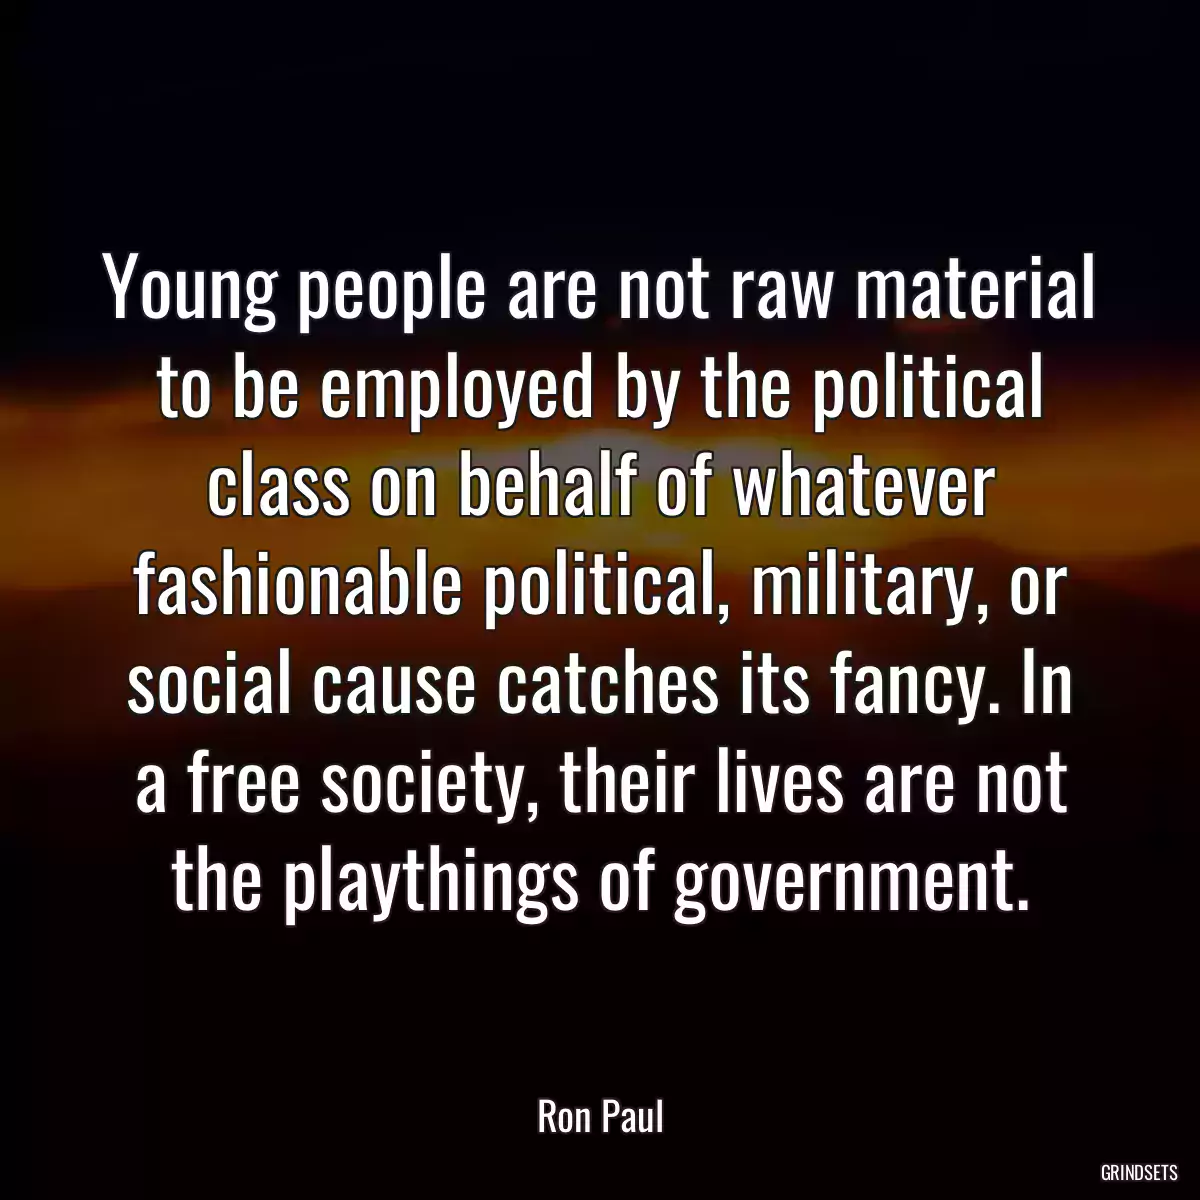 Young people are not raw material to be employed by the political class on behalf of whatever fashionable political, military, or social cause catches its fancy. In a free society, their lives are not the playthings of government.